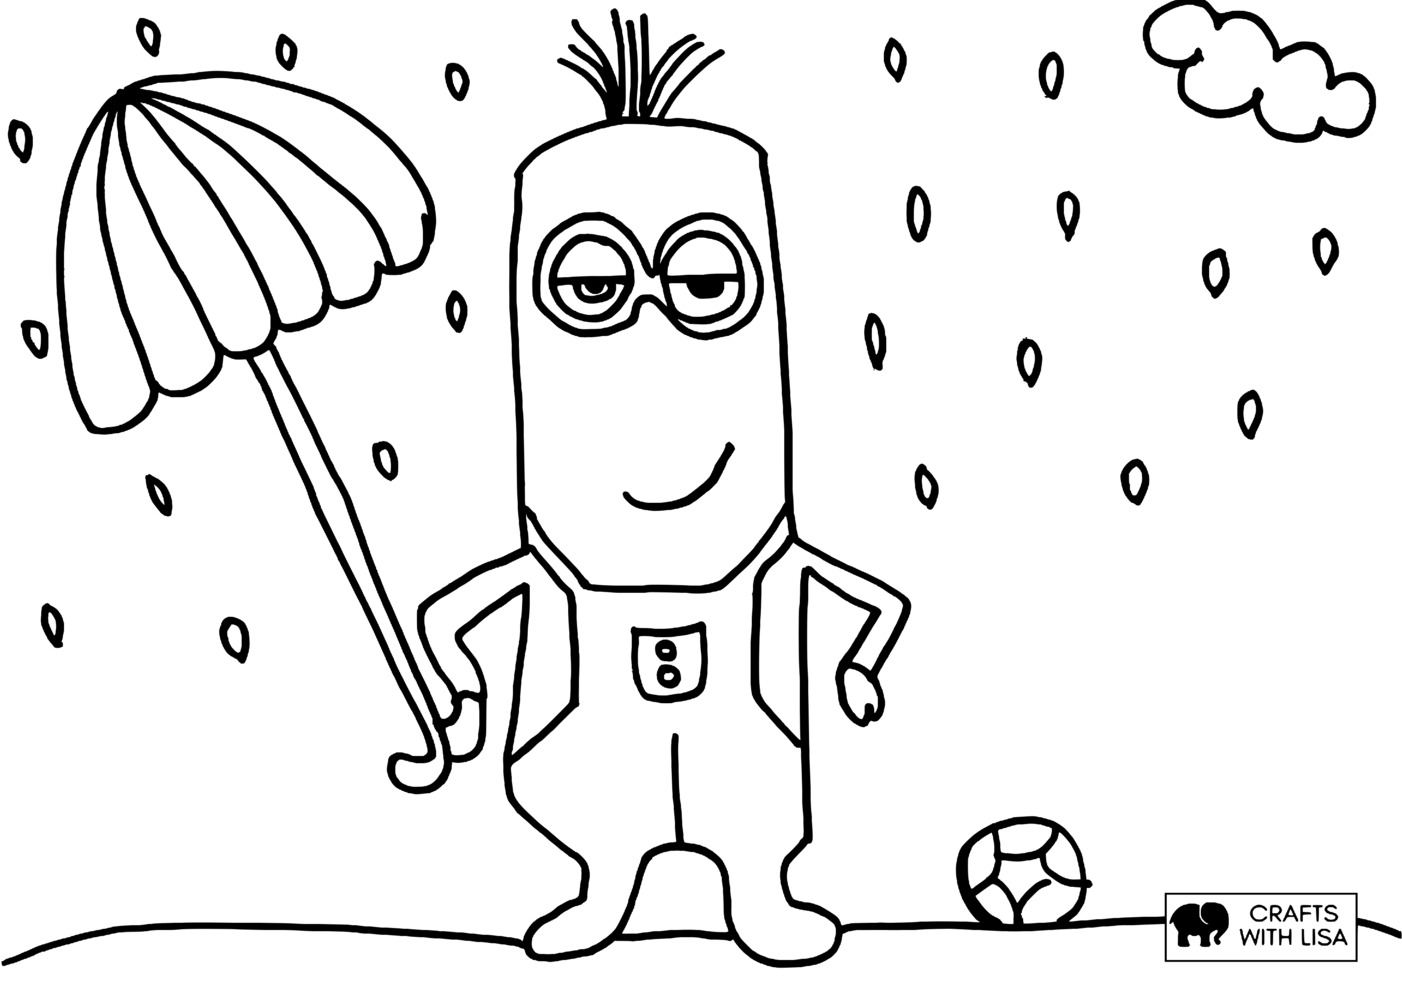 kevin minion coloring pages